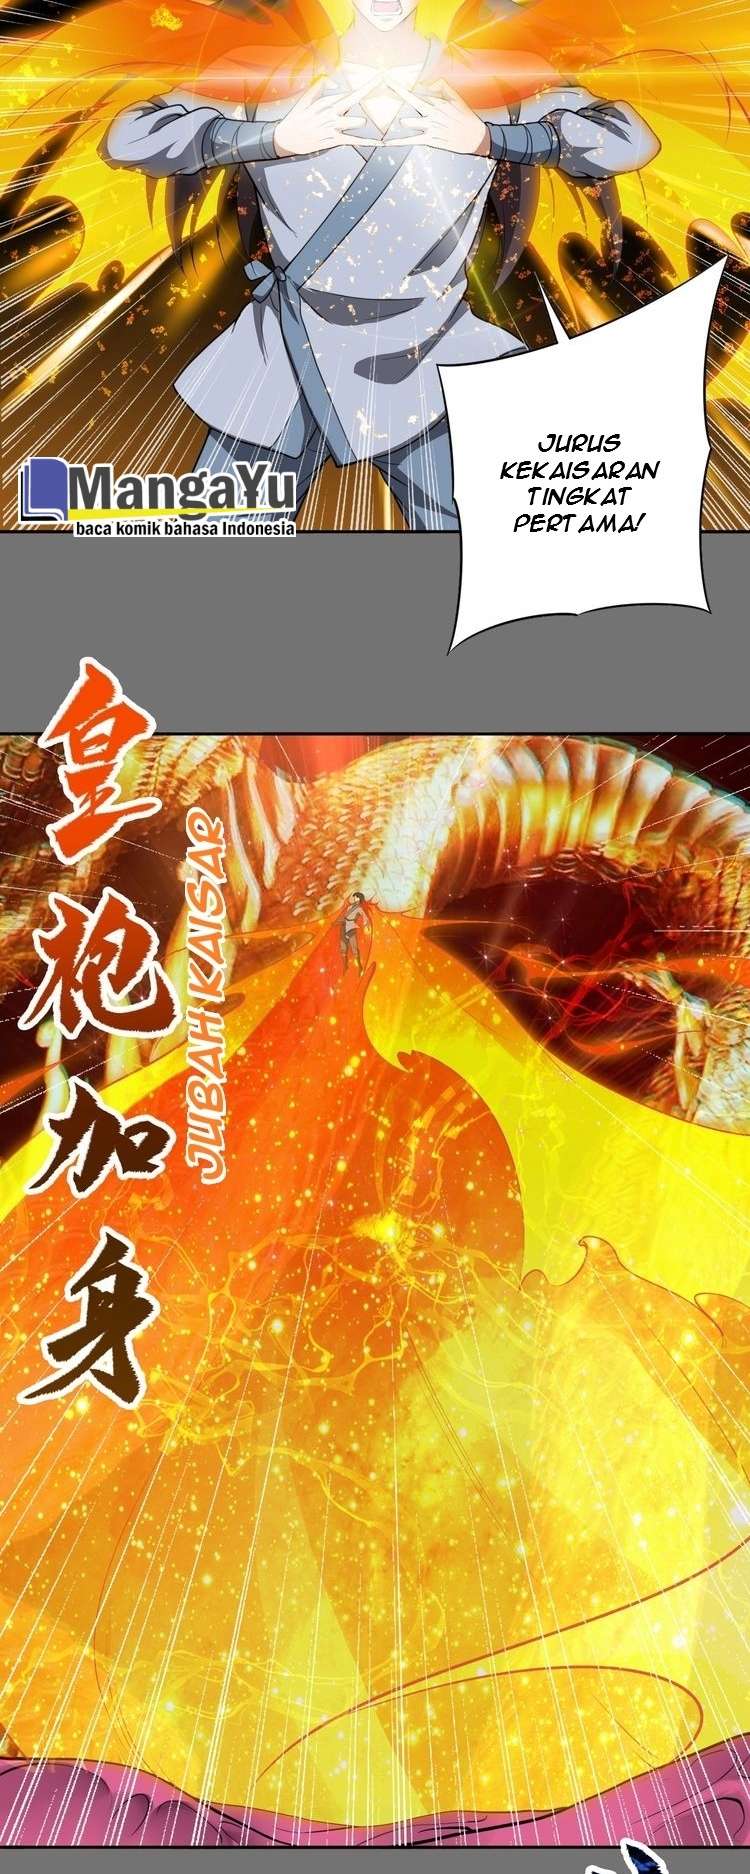 The Sleepy Dragon Continent Chapter 18